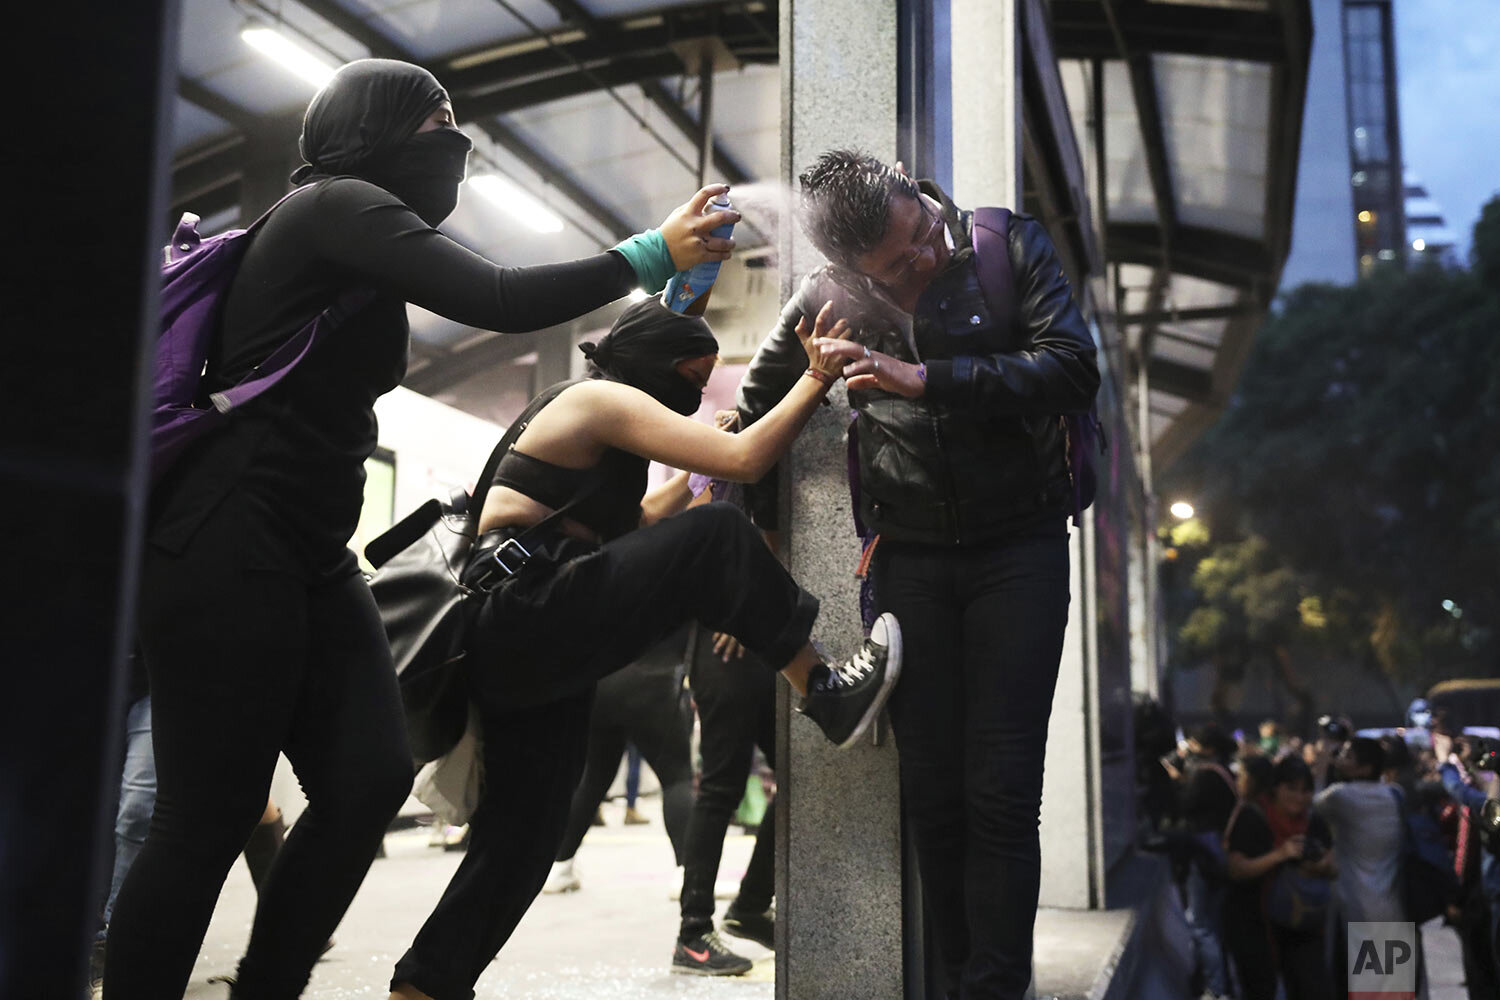  Two women attack a male commuter, one spraying him in the face with paint another kicking him, at a bus station, during a protest sparked by a string of alleged sexual attacks by police officers, in Mexico City, Aug. 16, 2019. On Friday, hundreds of